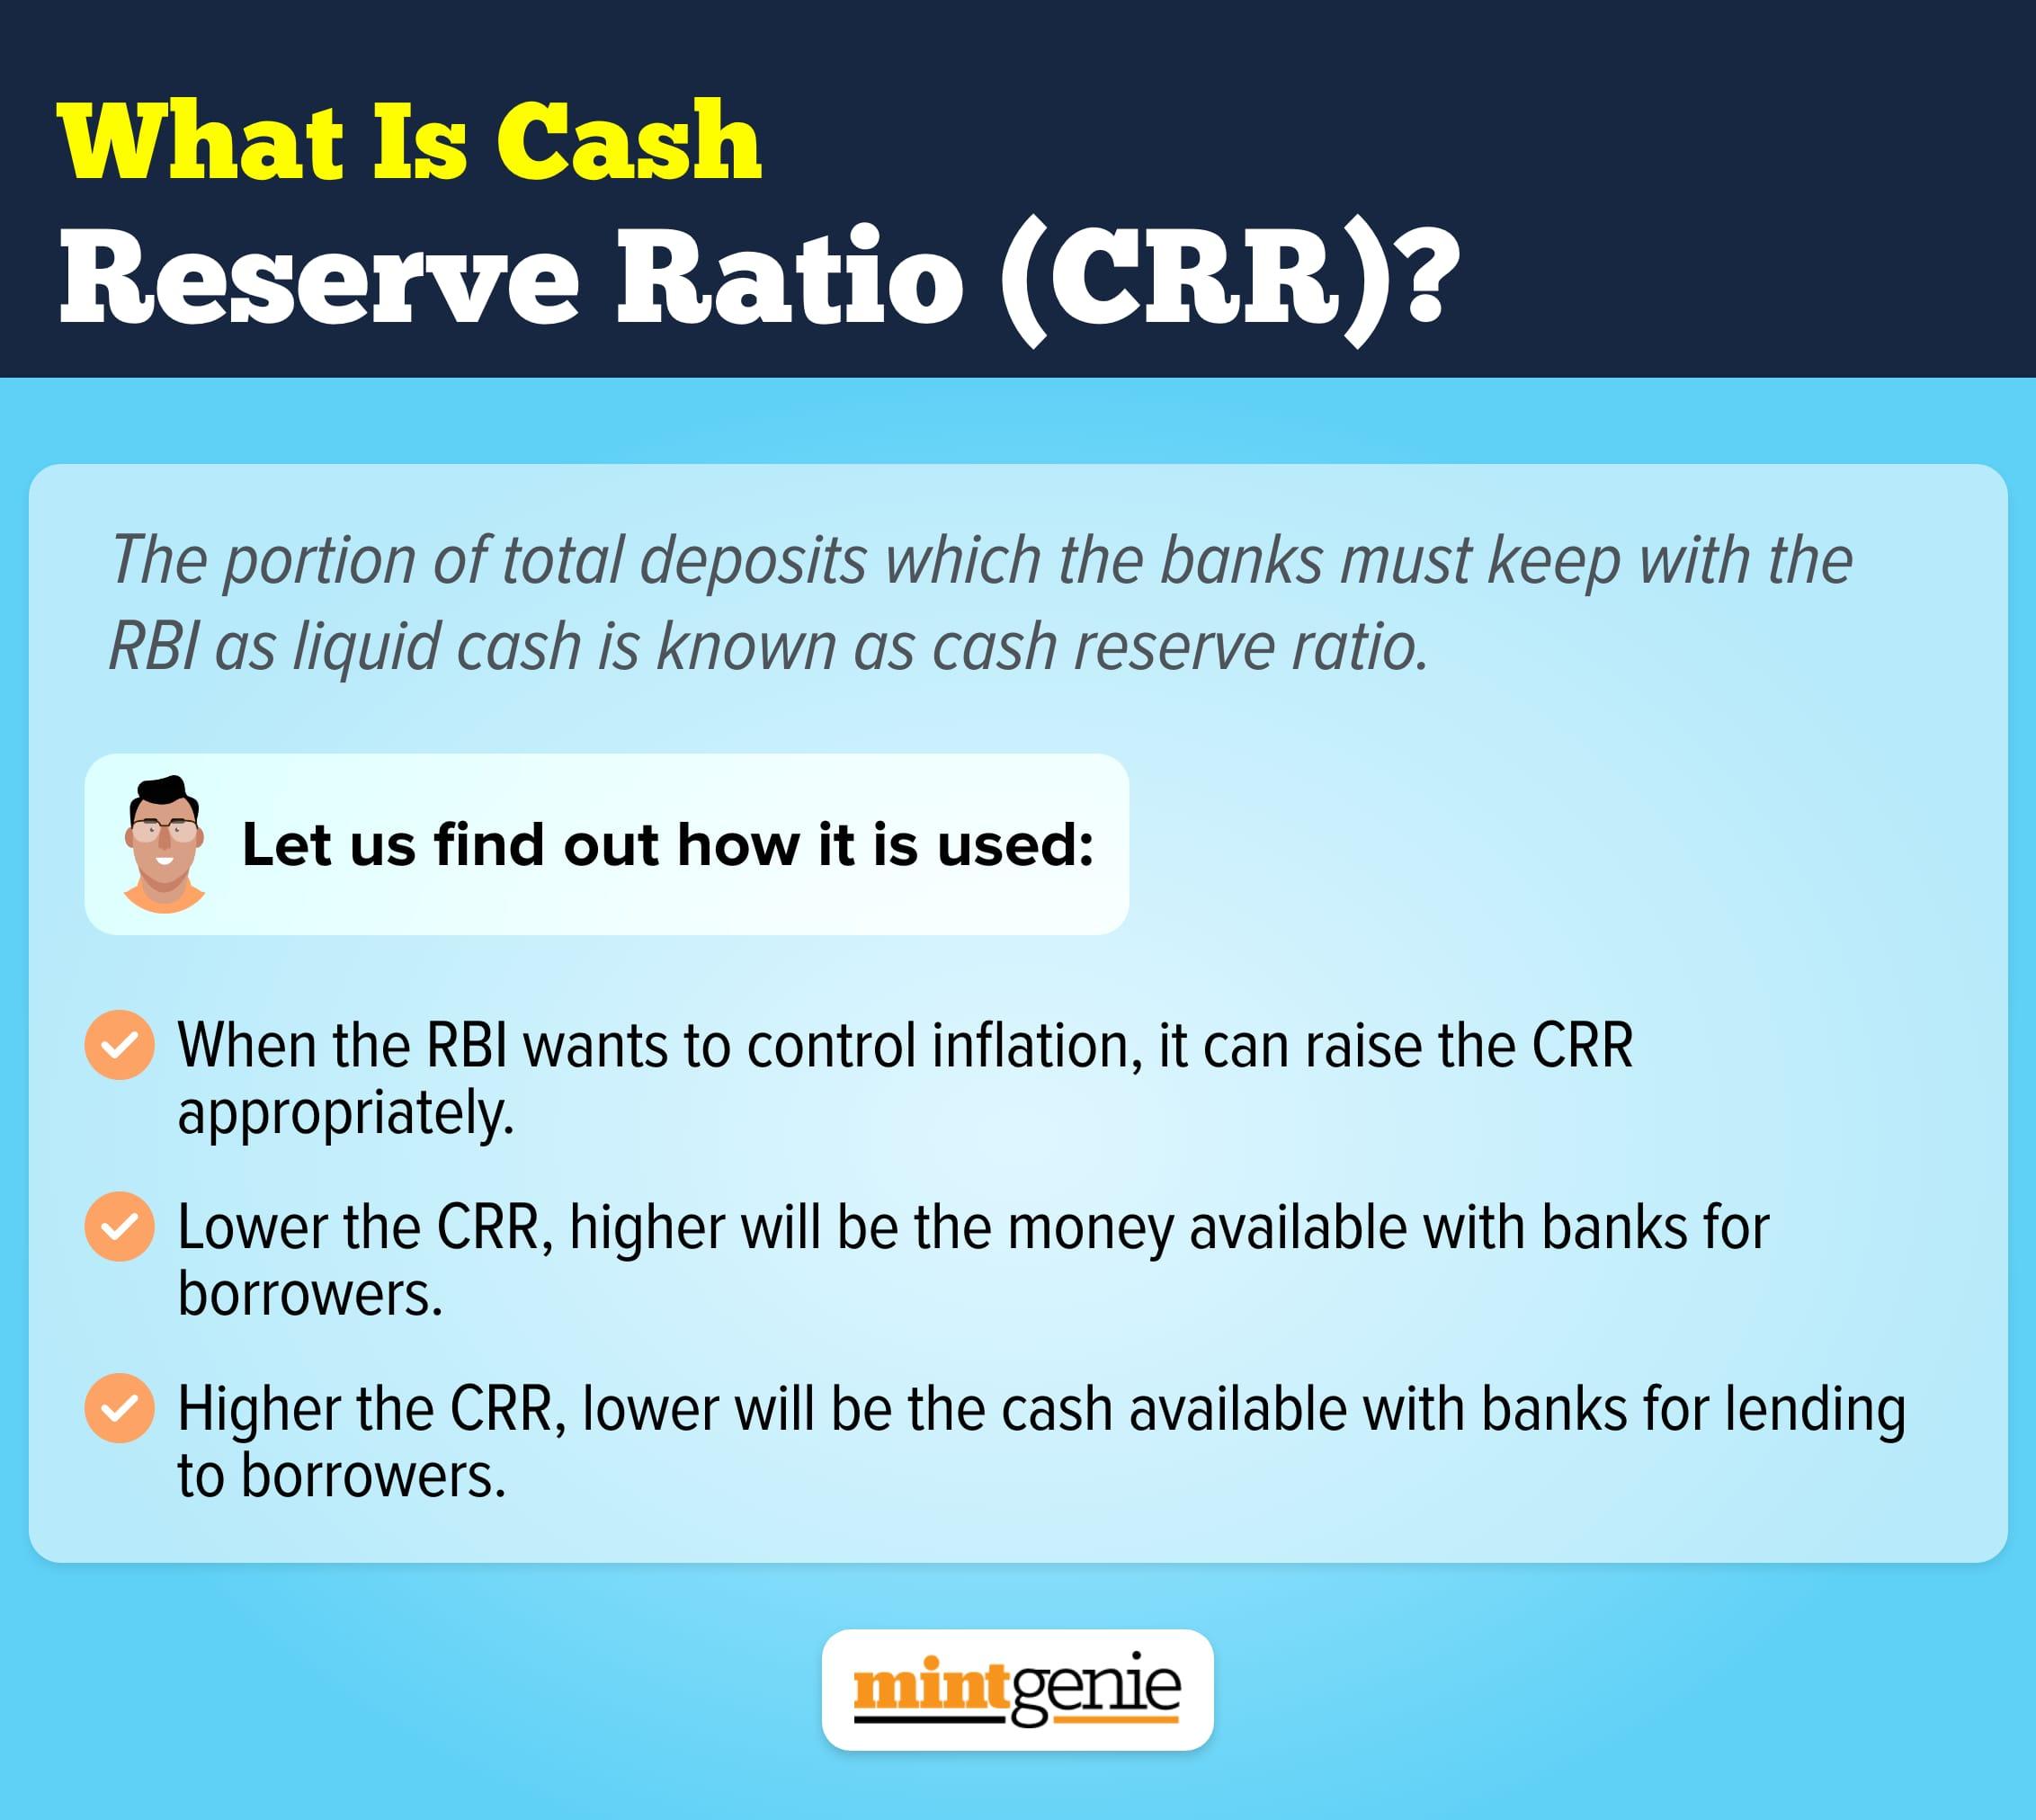 The portion of total deposits which the banks must keep with the RBI as liquid cash is known as cash reserve ratio.&nbsp;